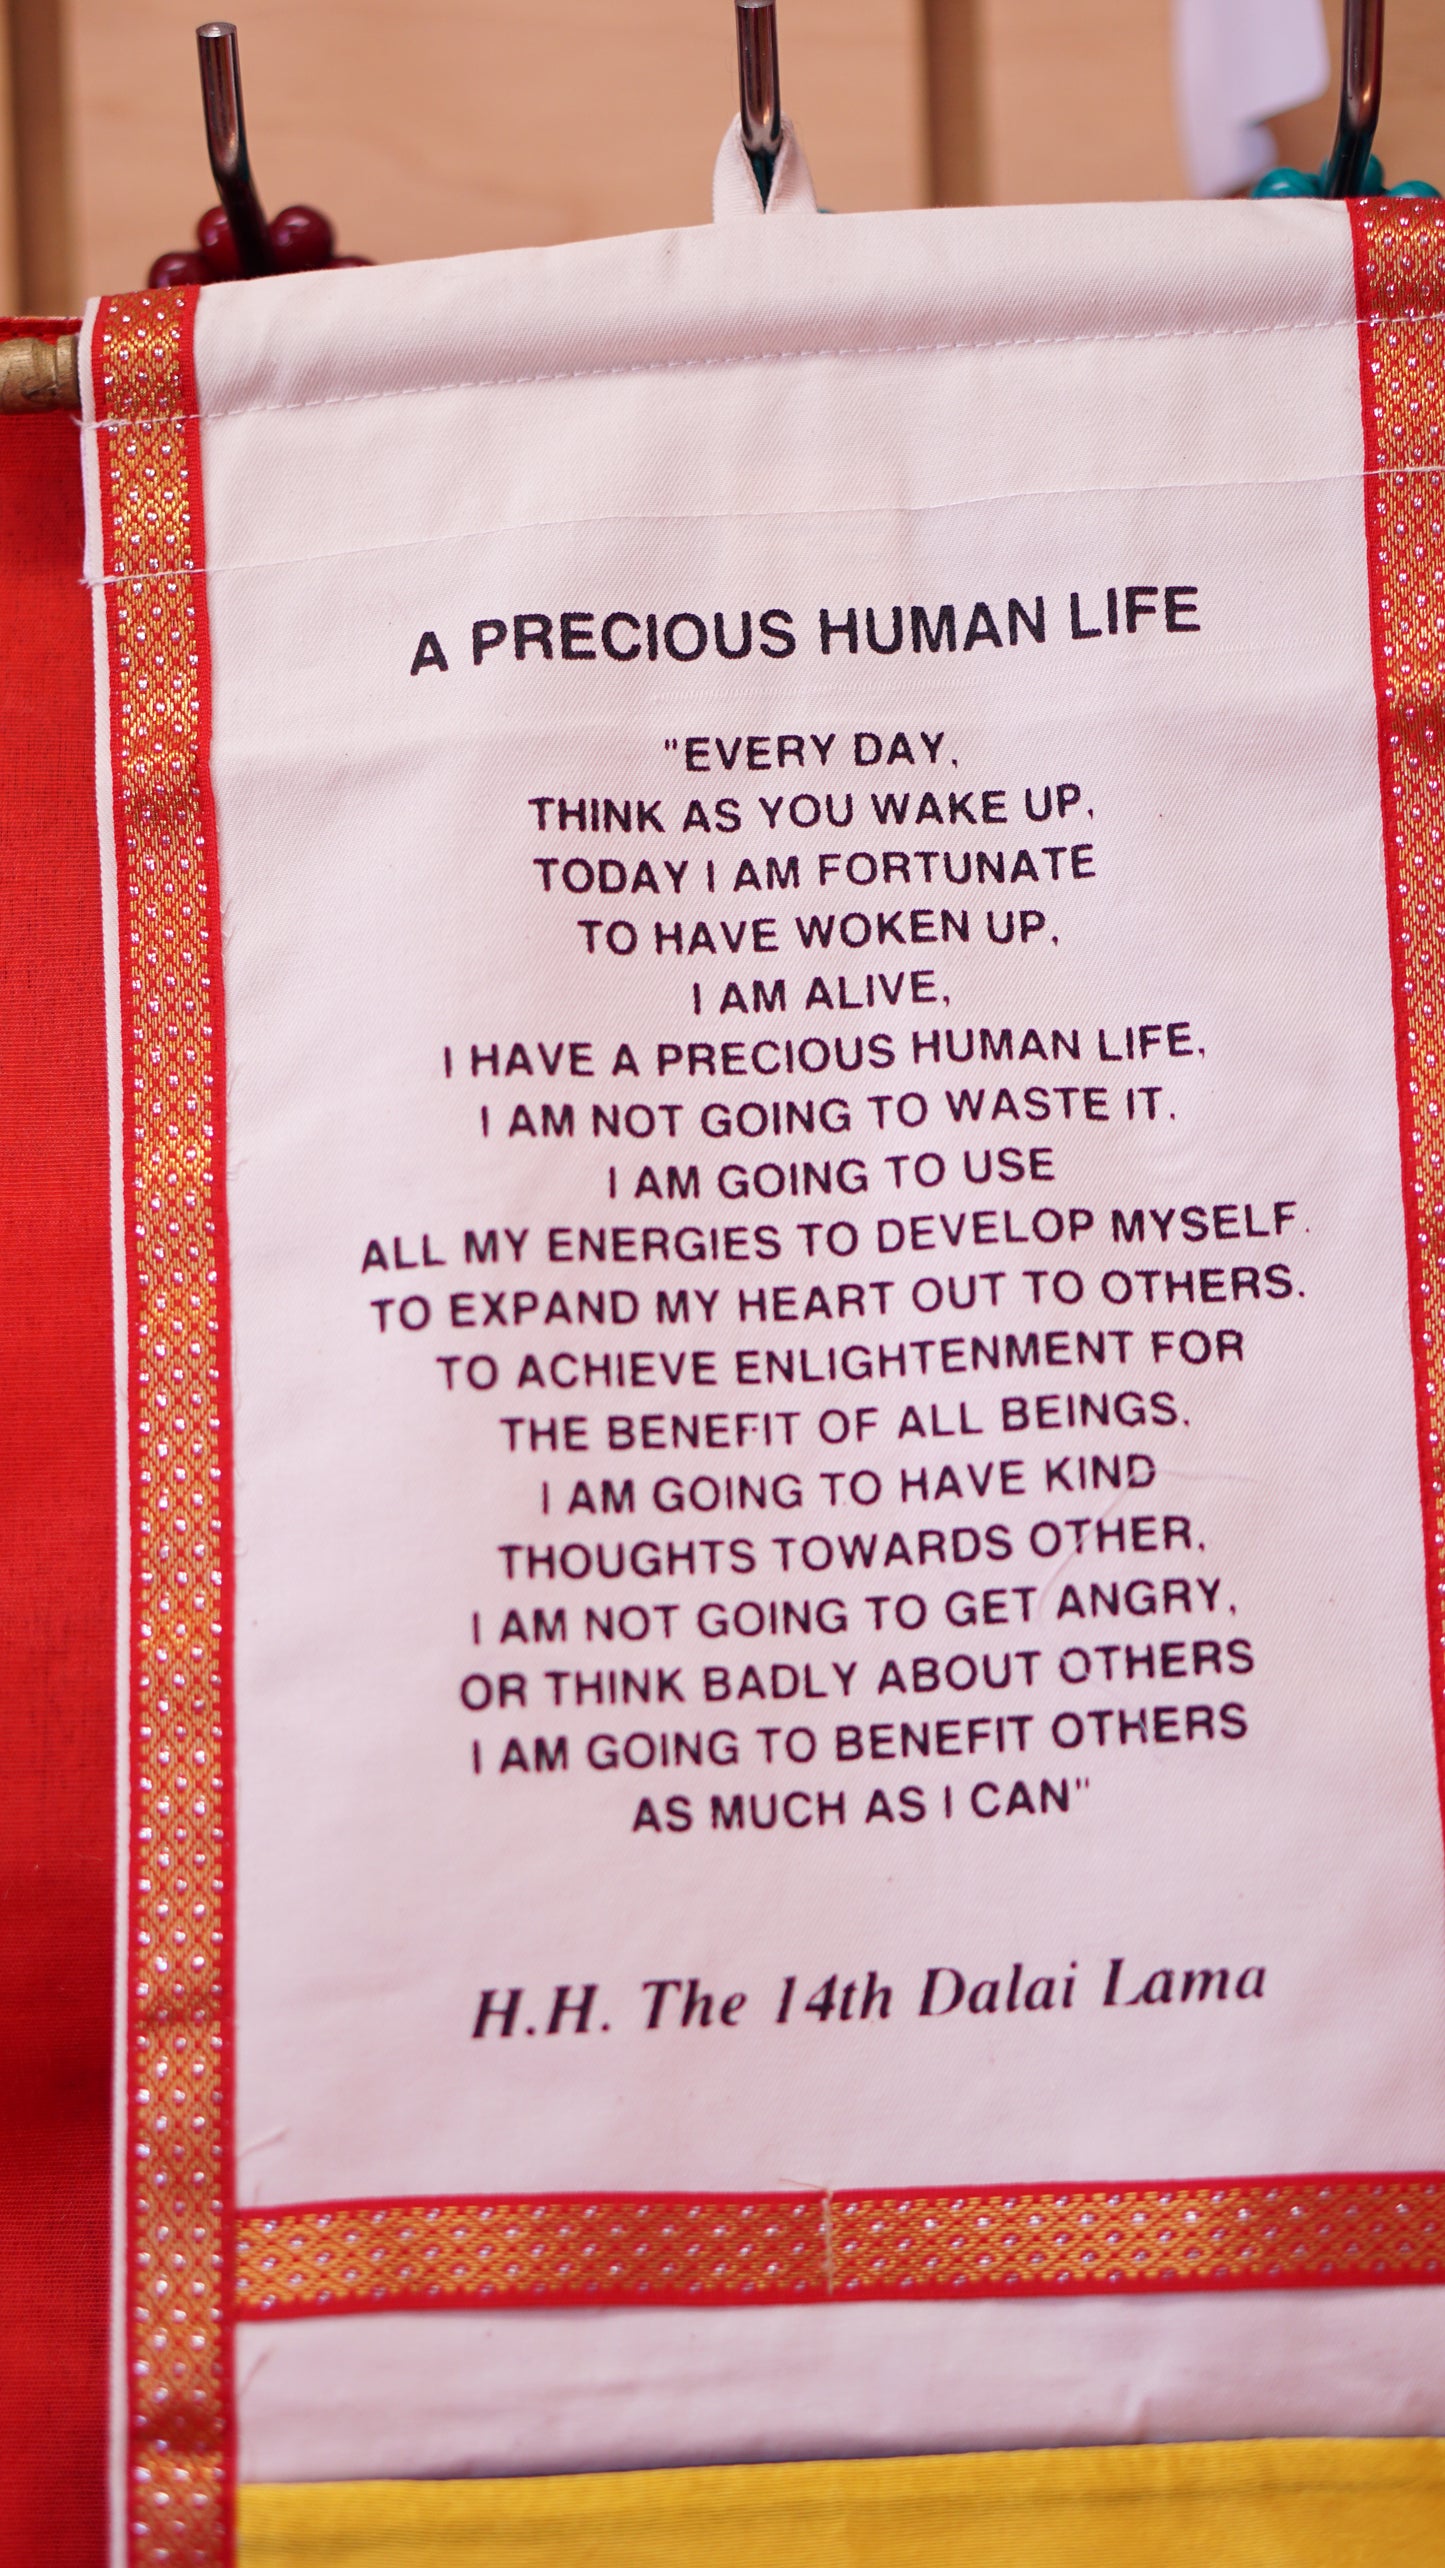 Two pocket decorative wall hanging with His Holiness the Dalai Lama's quote.